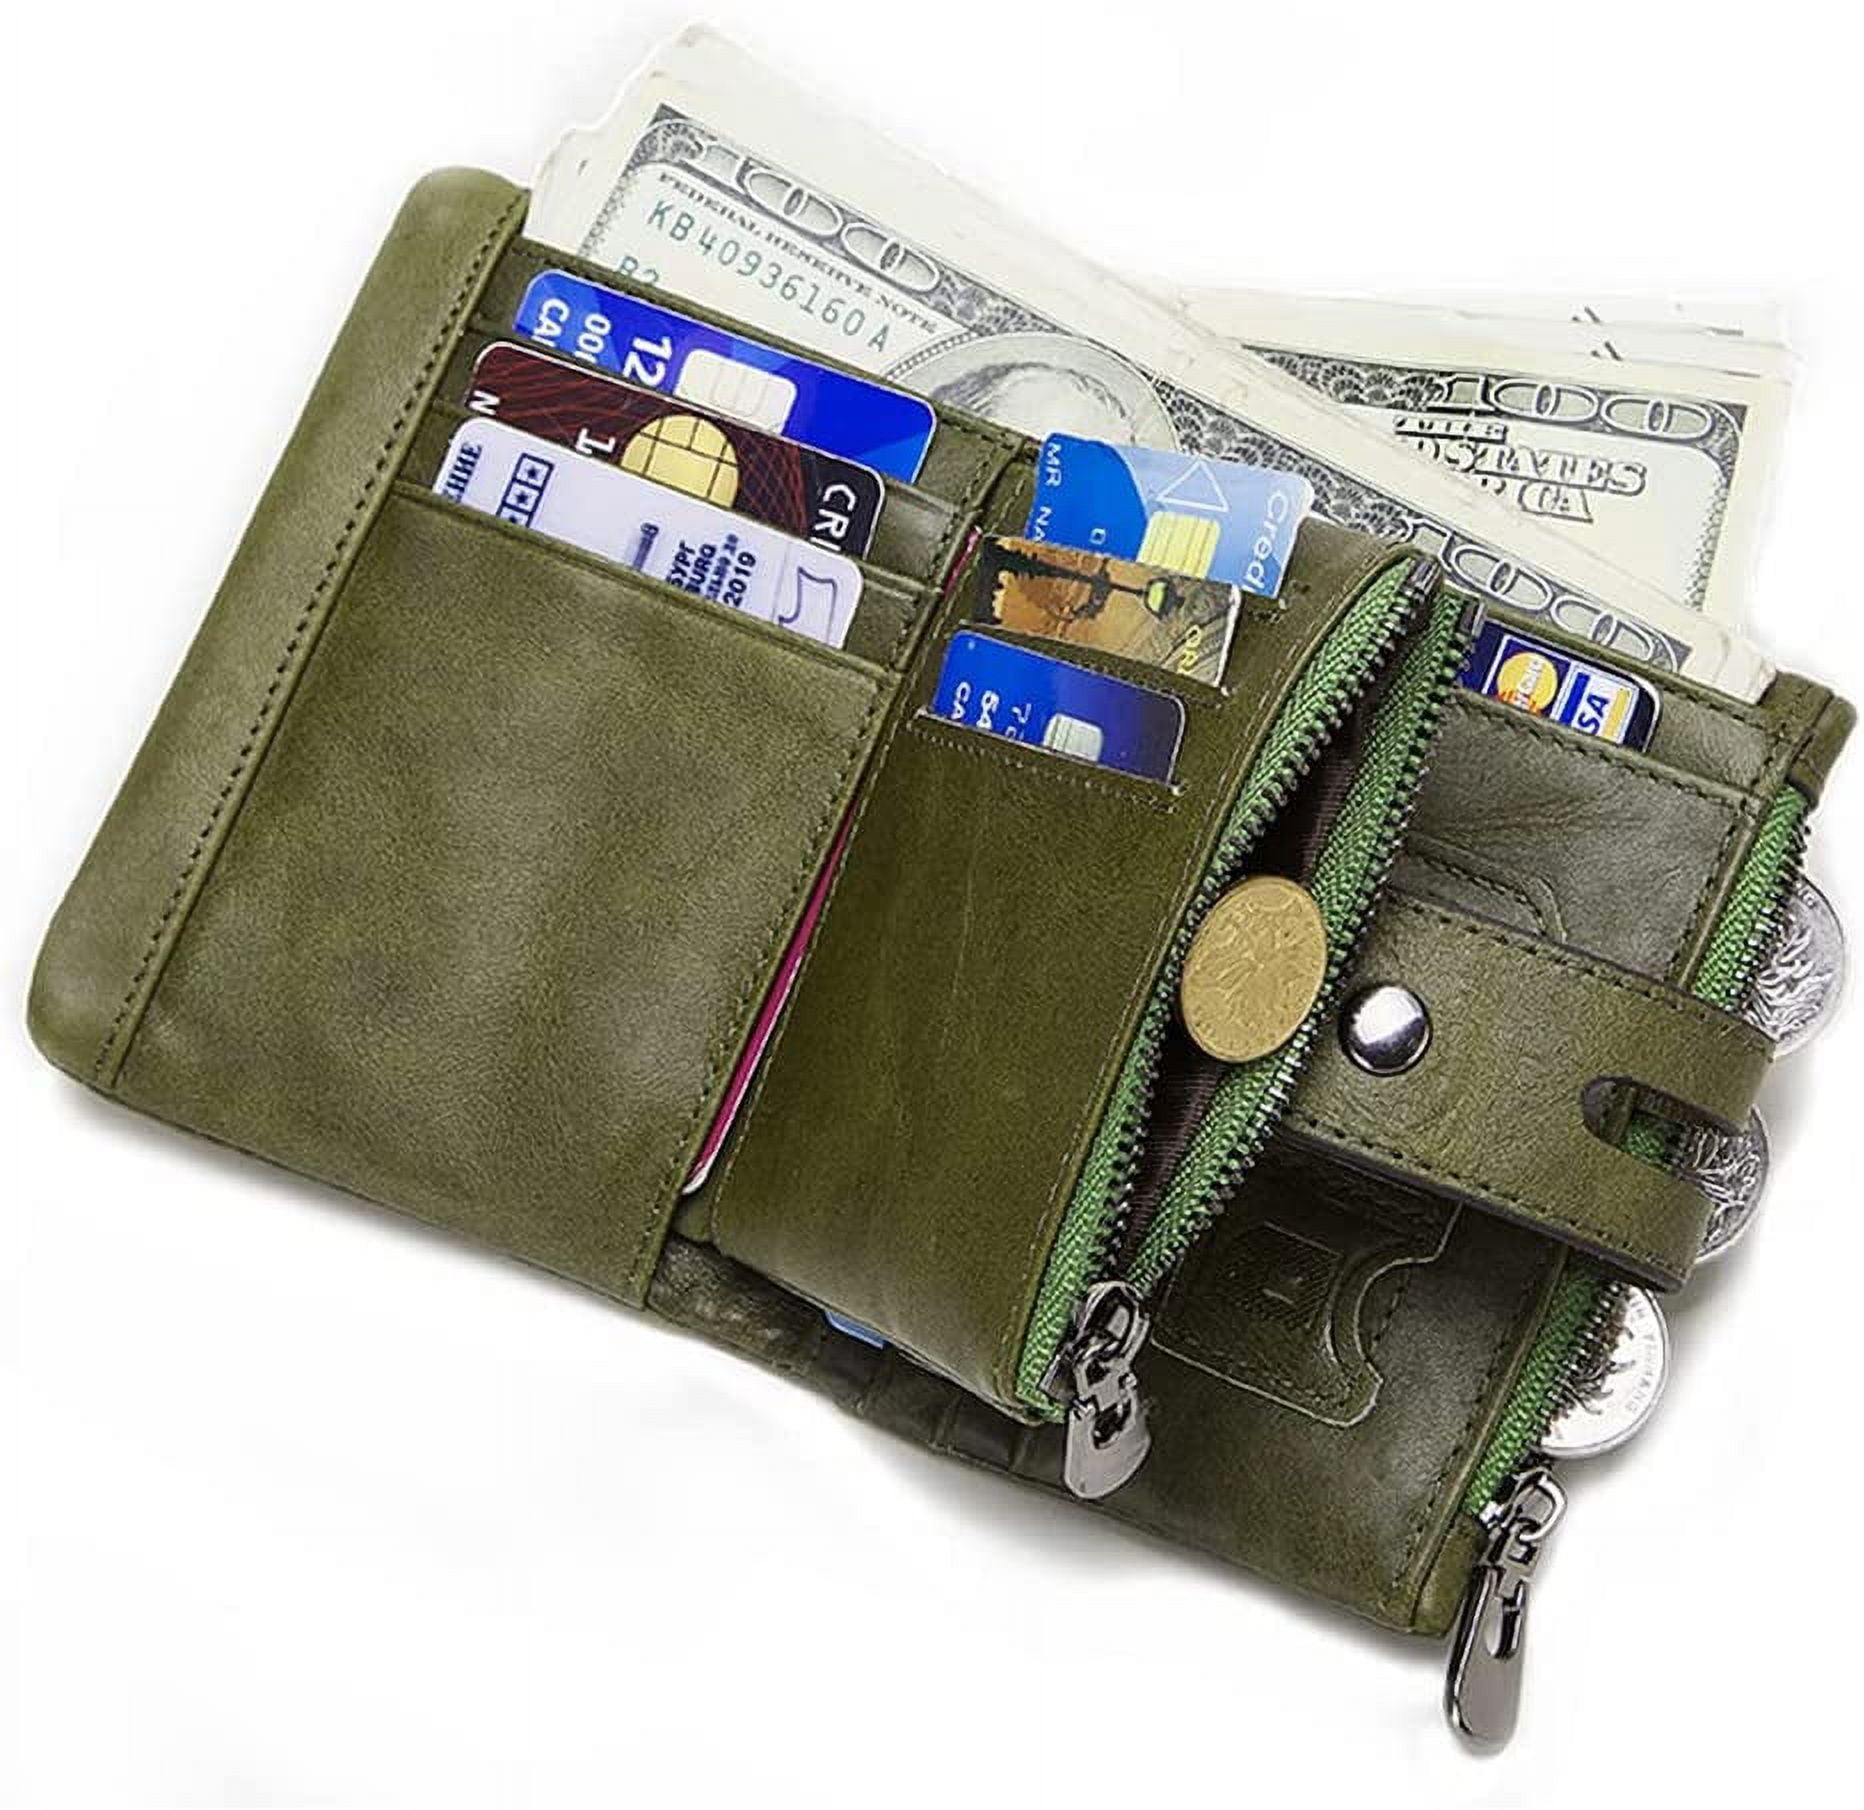 Defnes Chain Wallets for Men Genuine Leather Bifold Wallet RFID Blocking Mens Purse Credit Card with Coin Pocket, Men's, Size: One size, Brown